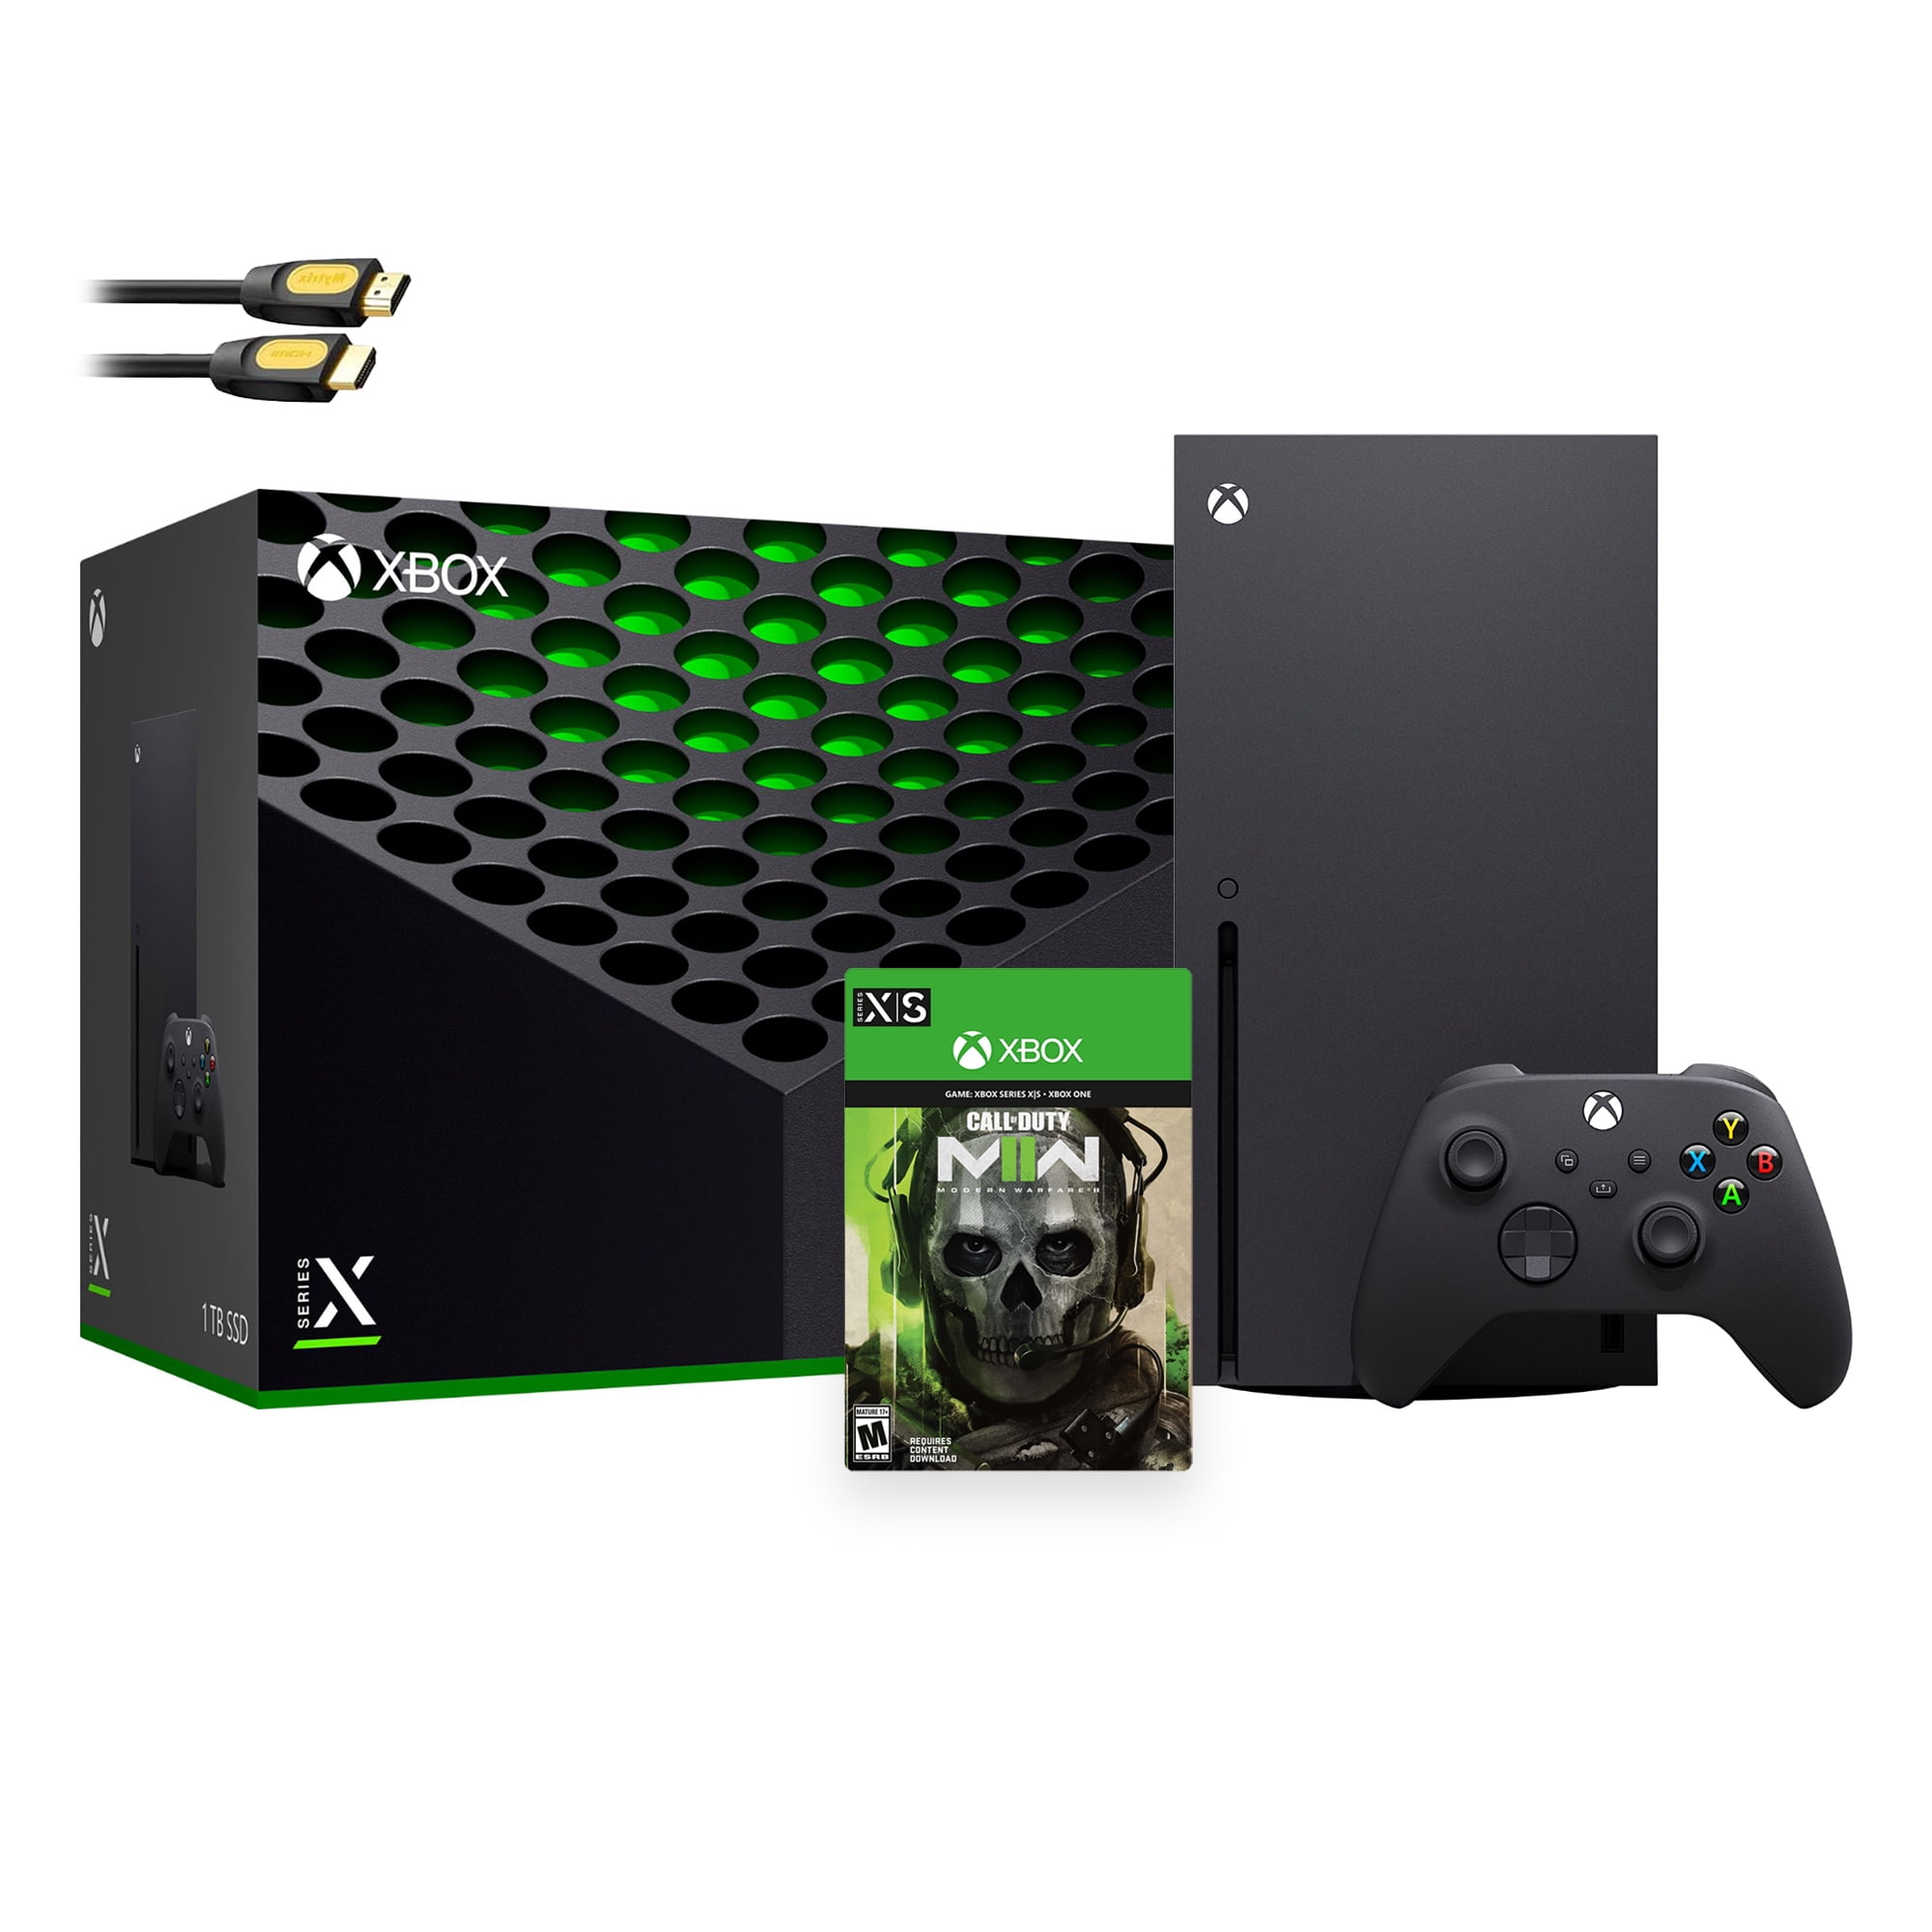 Microsoft Latest Xbox Series X Gaming Console Bundle 1TB SSD Black Xbox Console and Wireless Controller with Flight Simulator and HDMI Cable - Walmart.com